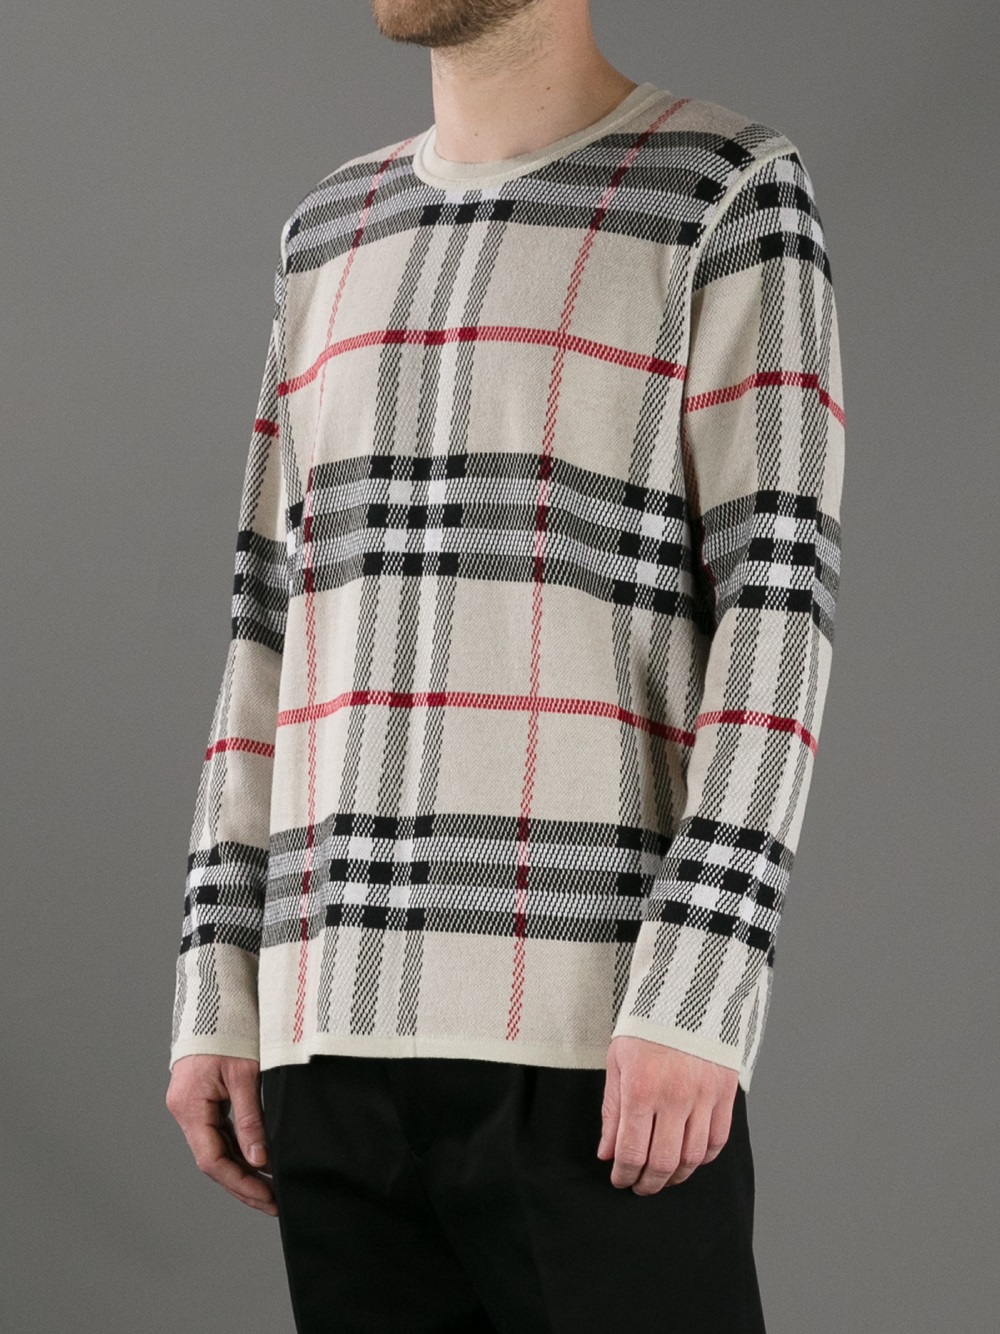 Burberry Checked Print Sweater in Natural for Men - Lyst